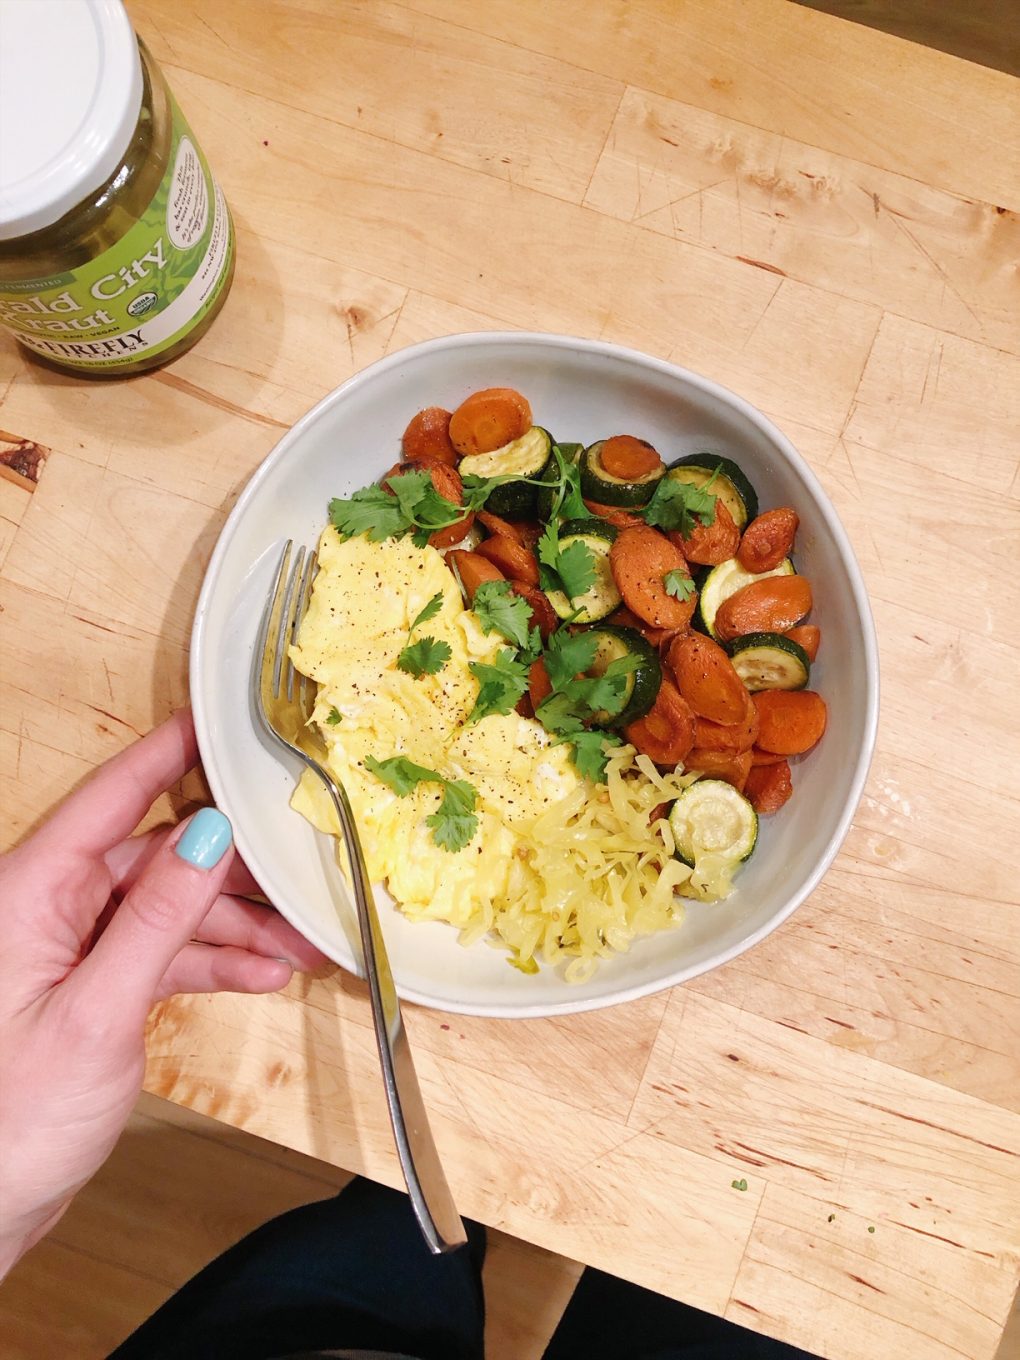 Soft scrambled eggs in a large white bowl alongside some pan roasted carrots and zuchinni with cilantro sprinkled on top and a scoop of saurkraut, over wooden kitchen counter